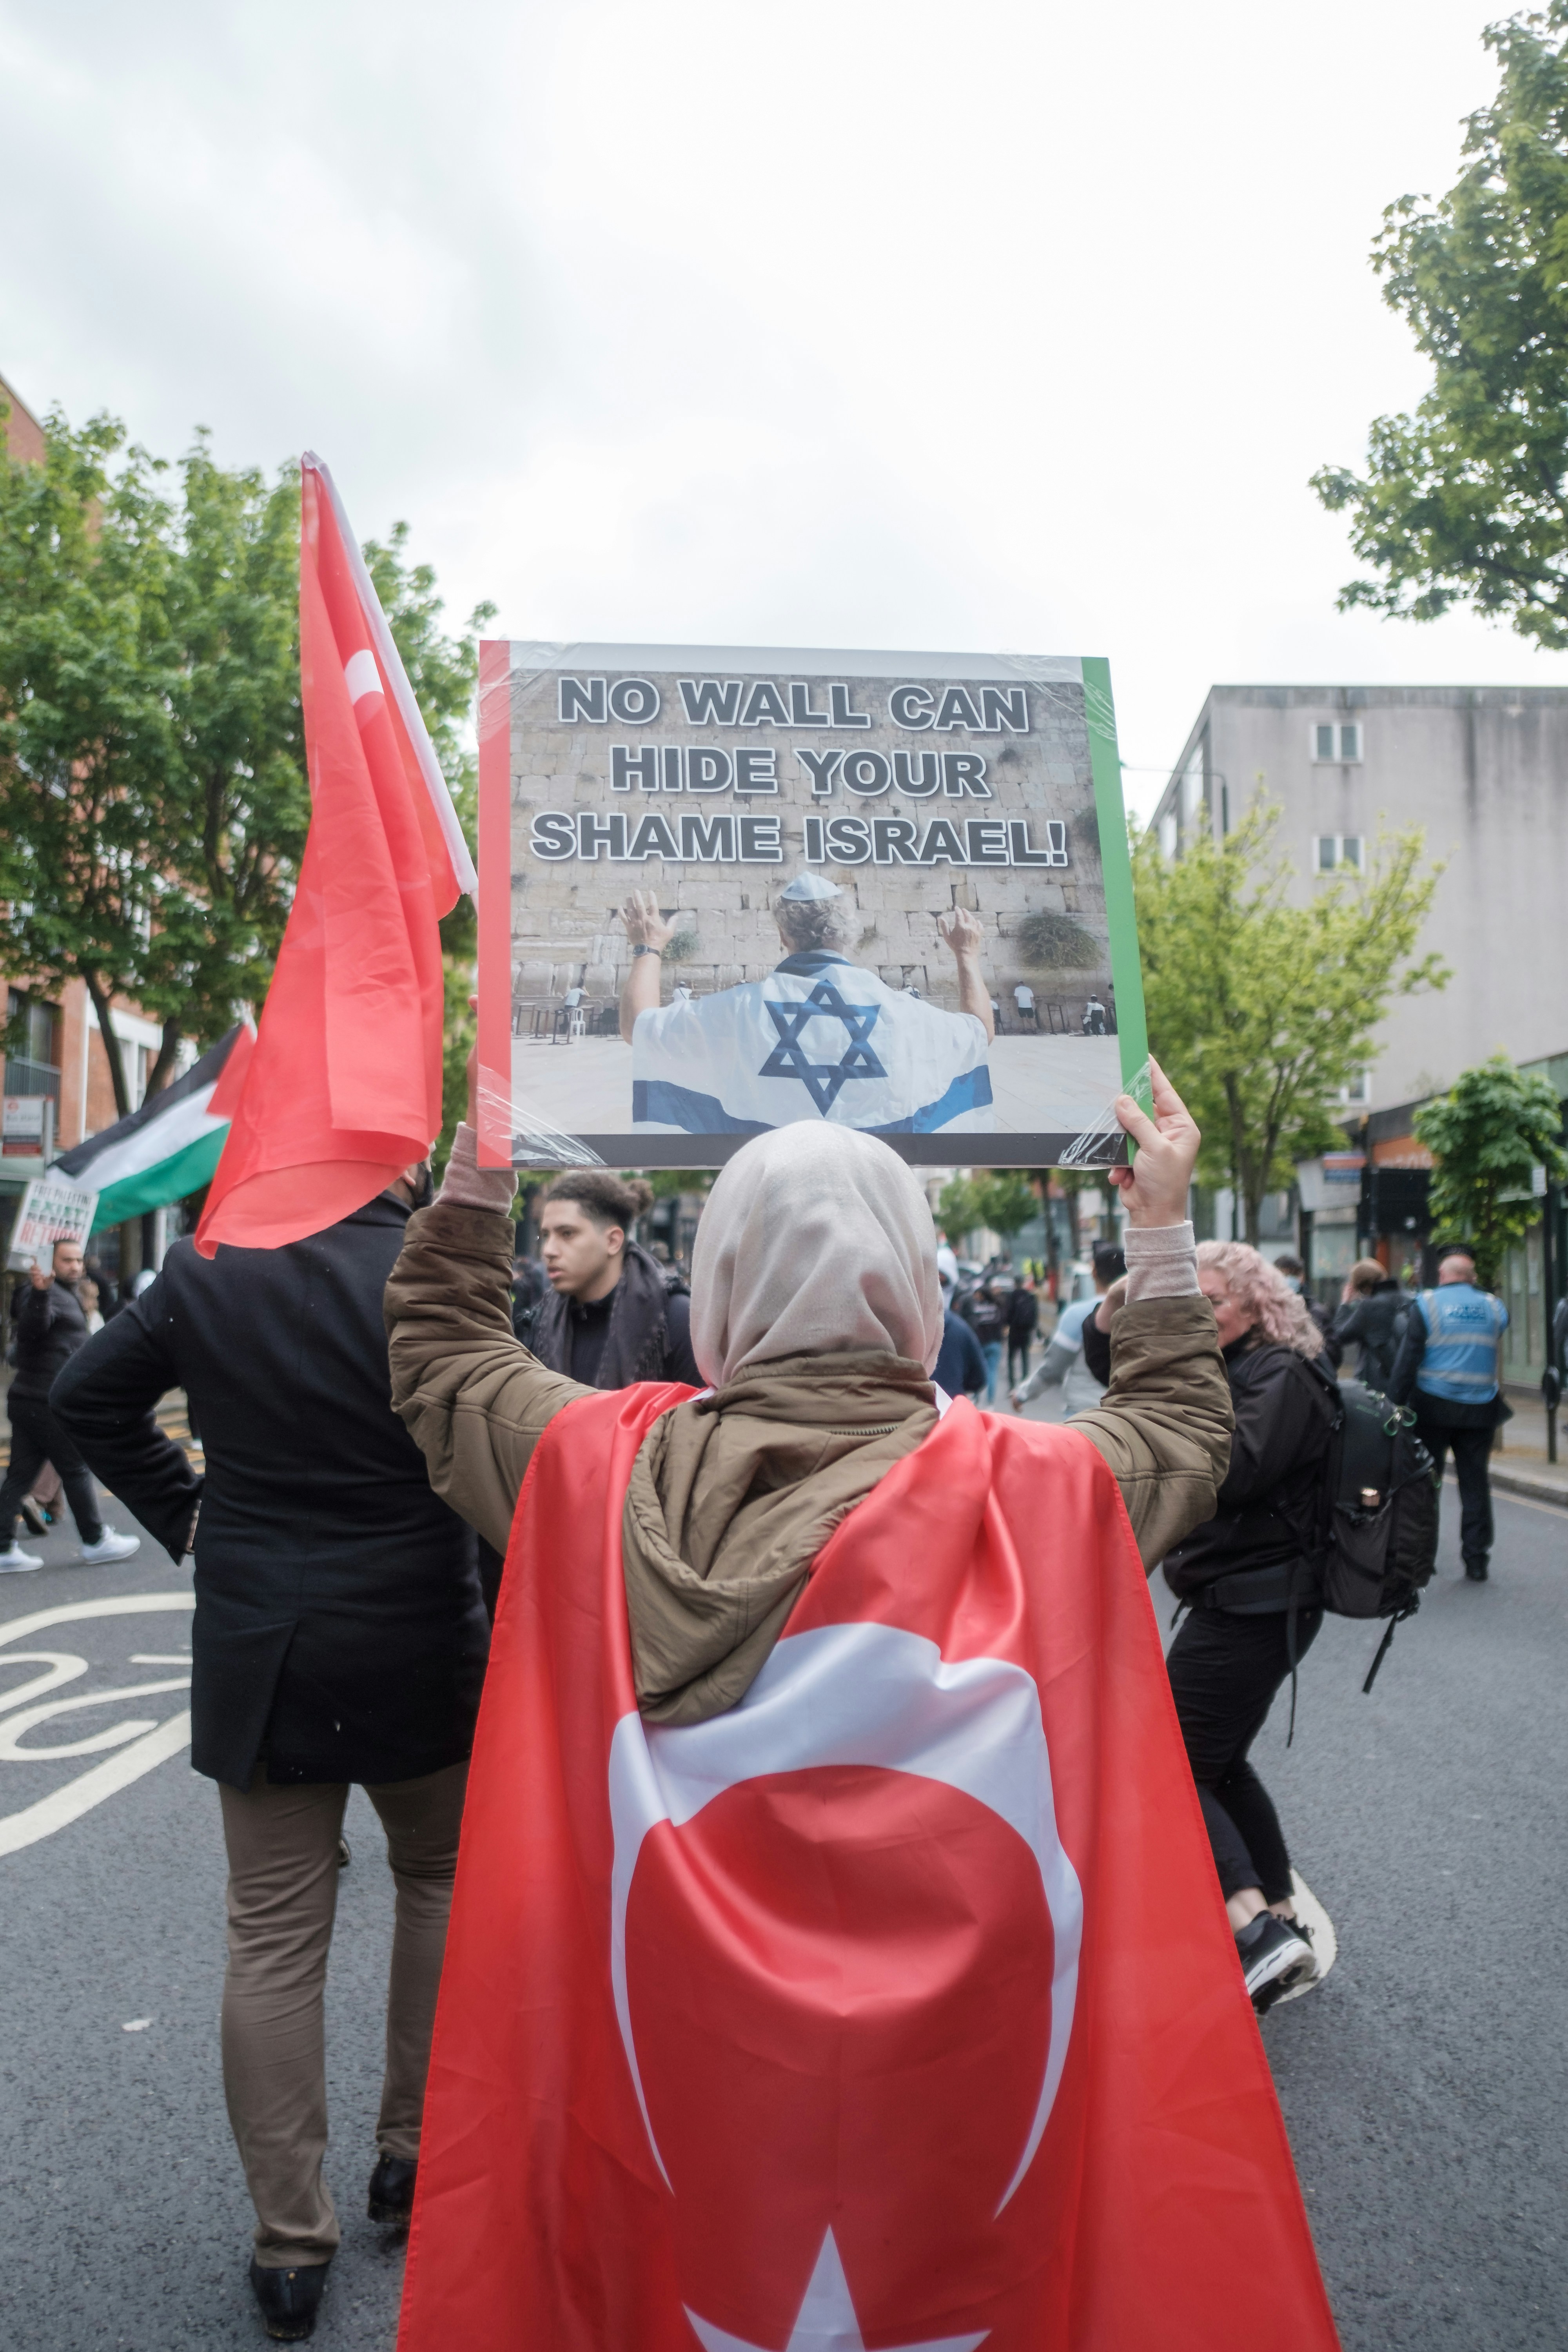 May 15th 2021, around 150,000 people attend the March for Palestine protest; they converged at the Israeli Embassy but were blocked and eventually met with resistance by the met Police